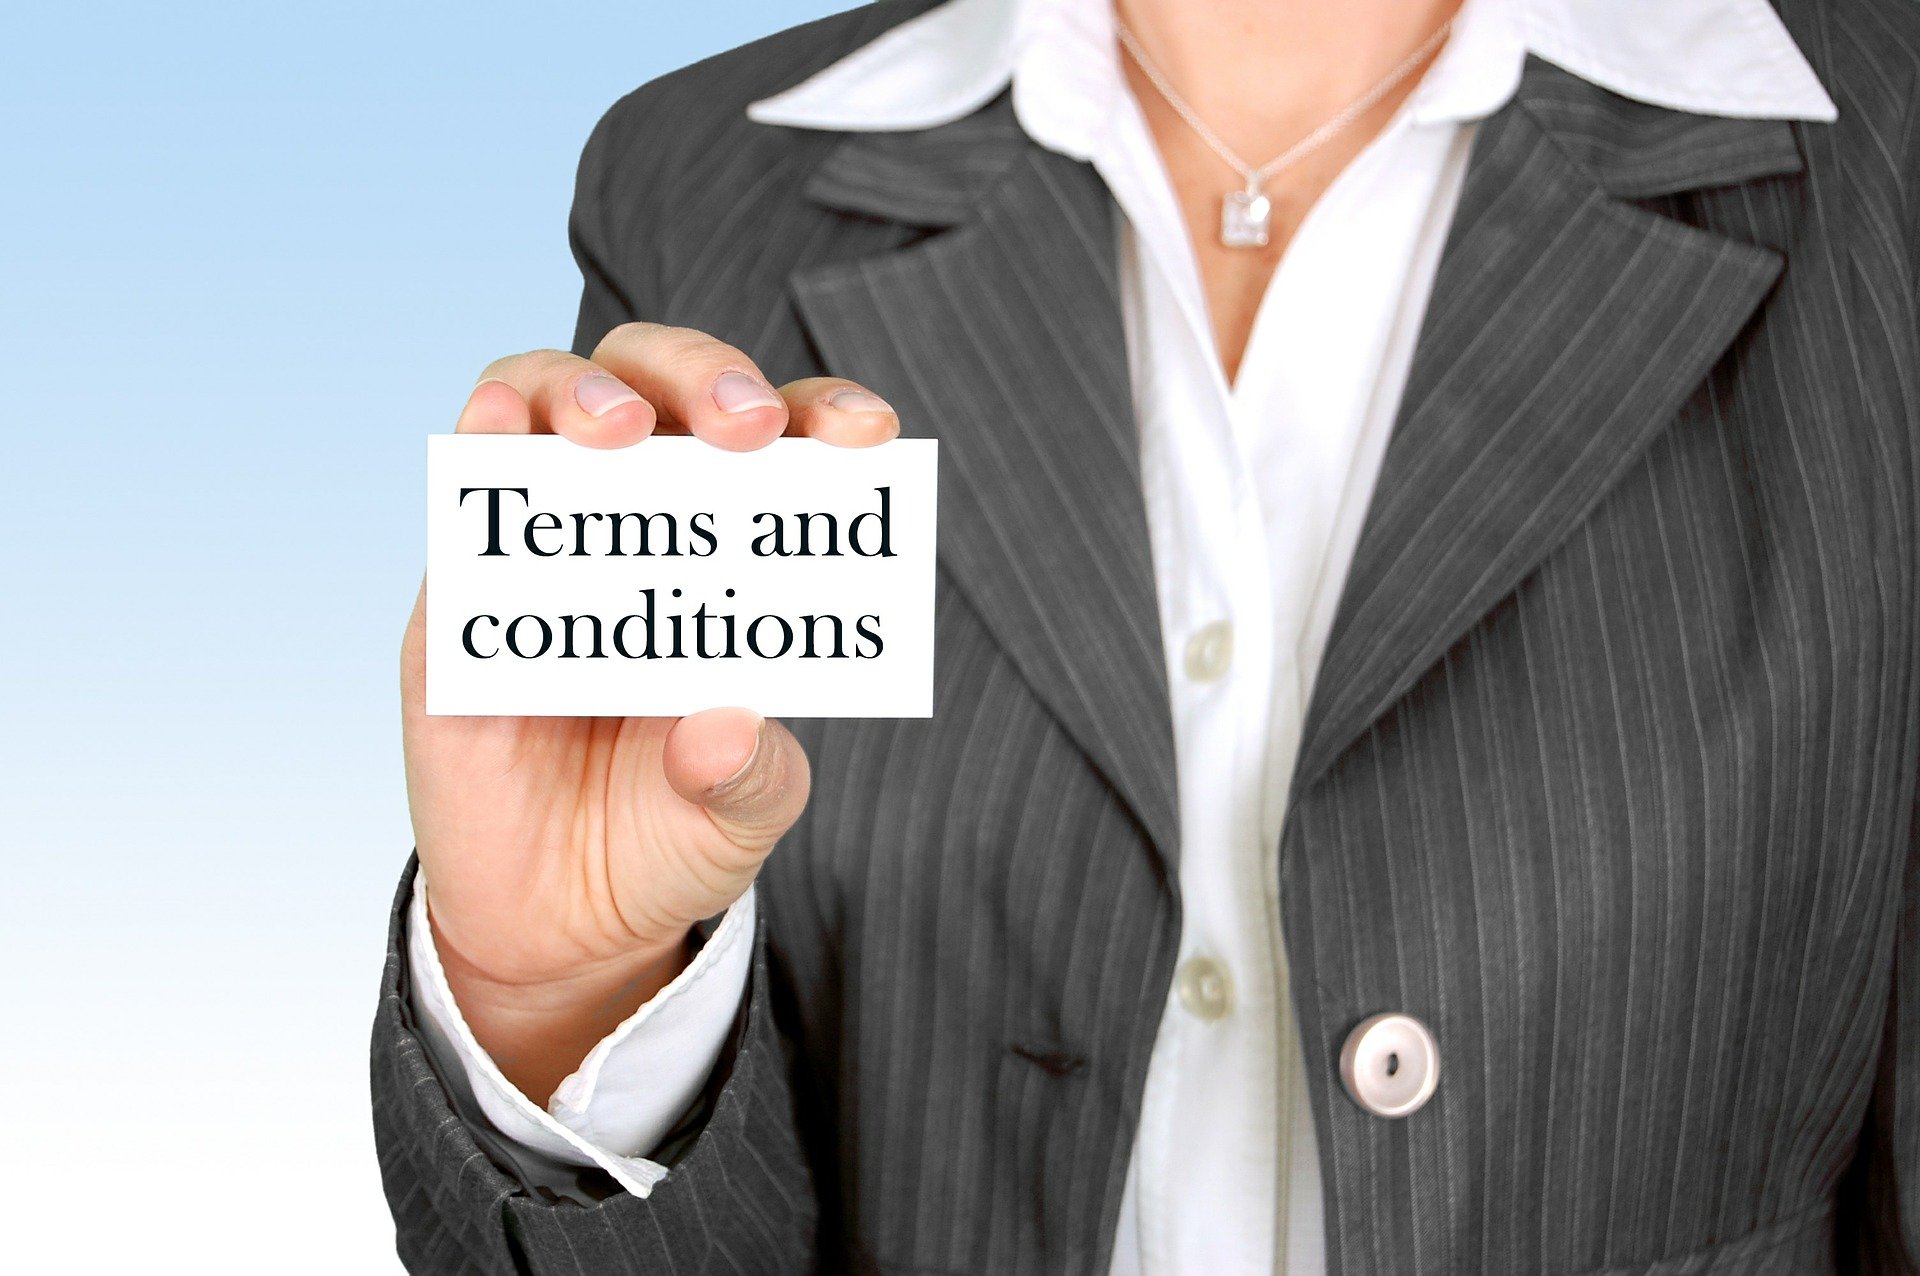 Terms and conditions card